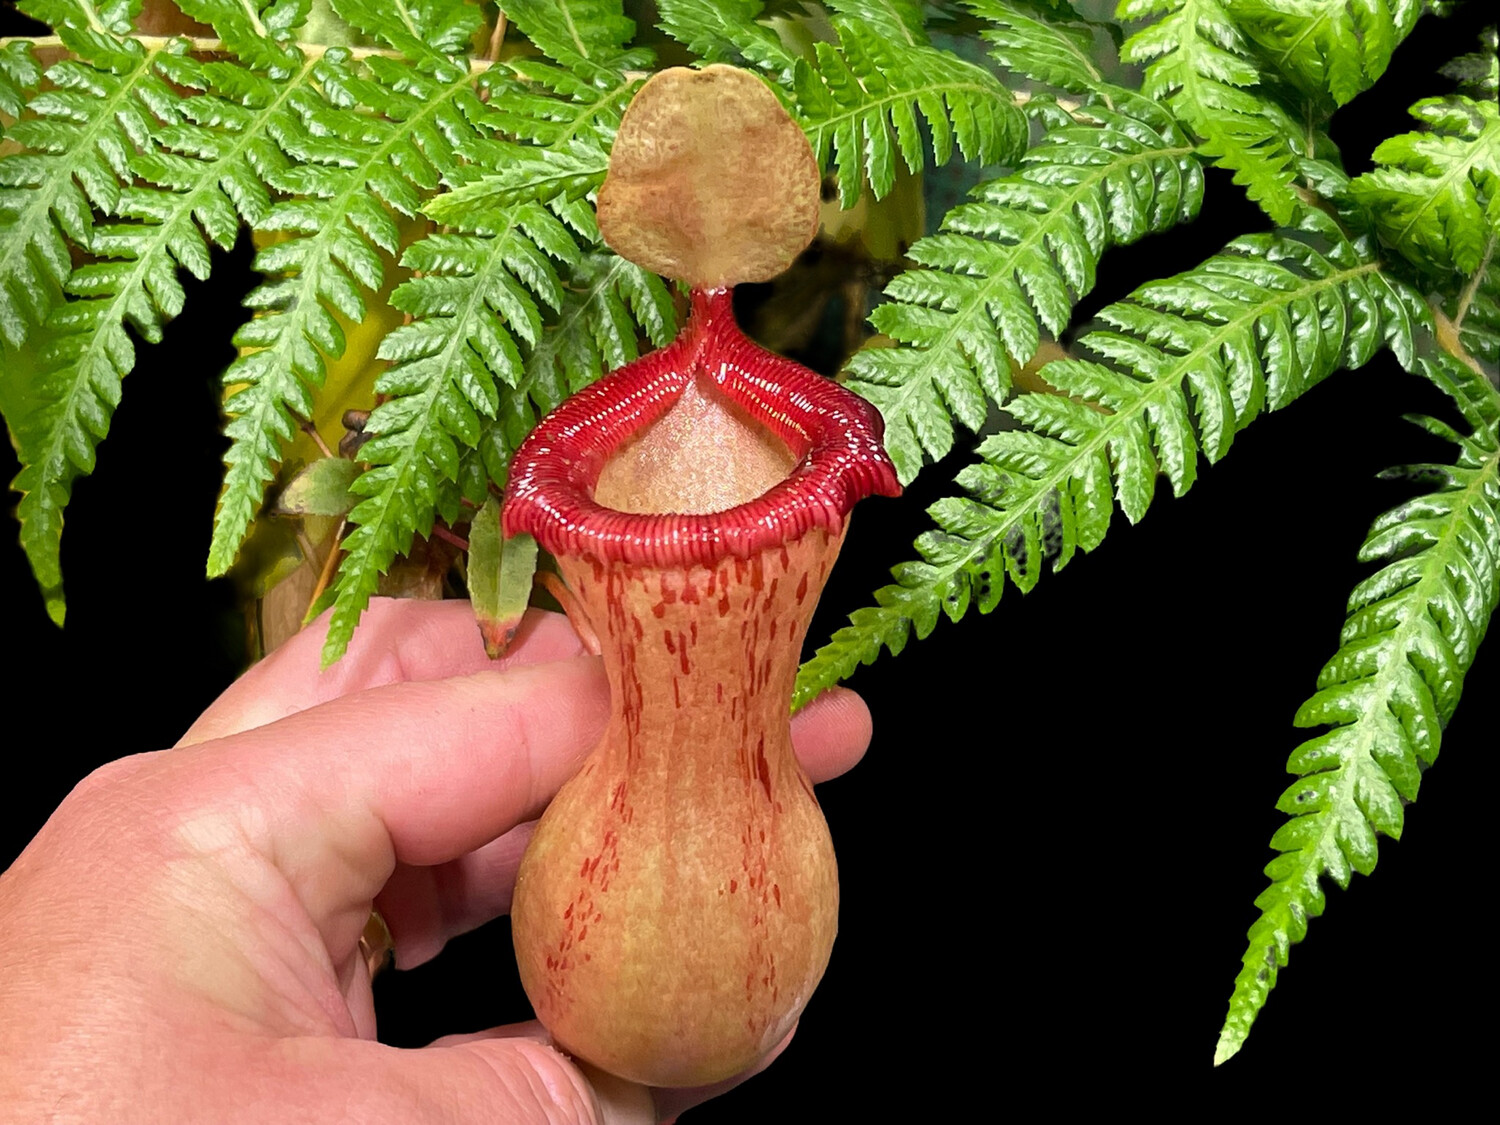 Nepenthes ventricosa - "Madja-As" BGH-Seed Grown (Small)